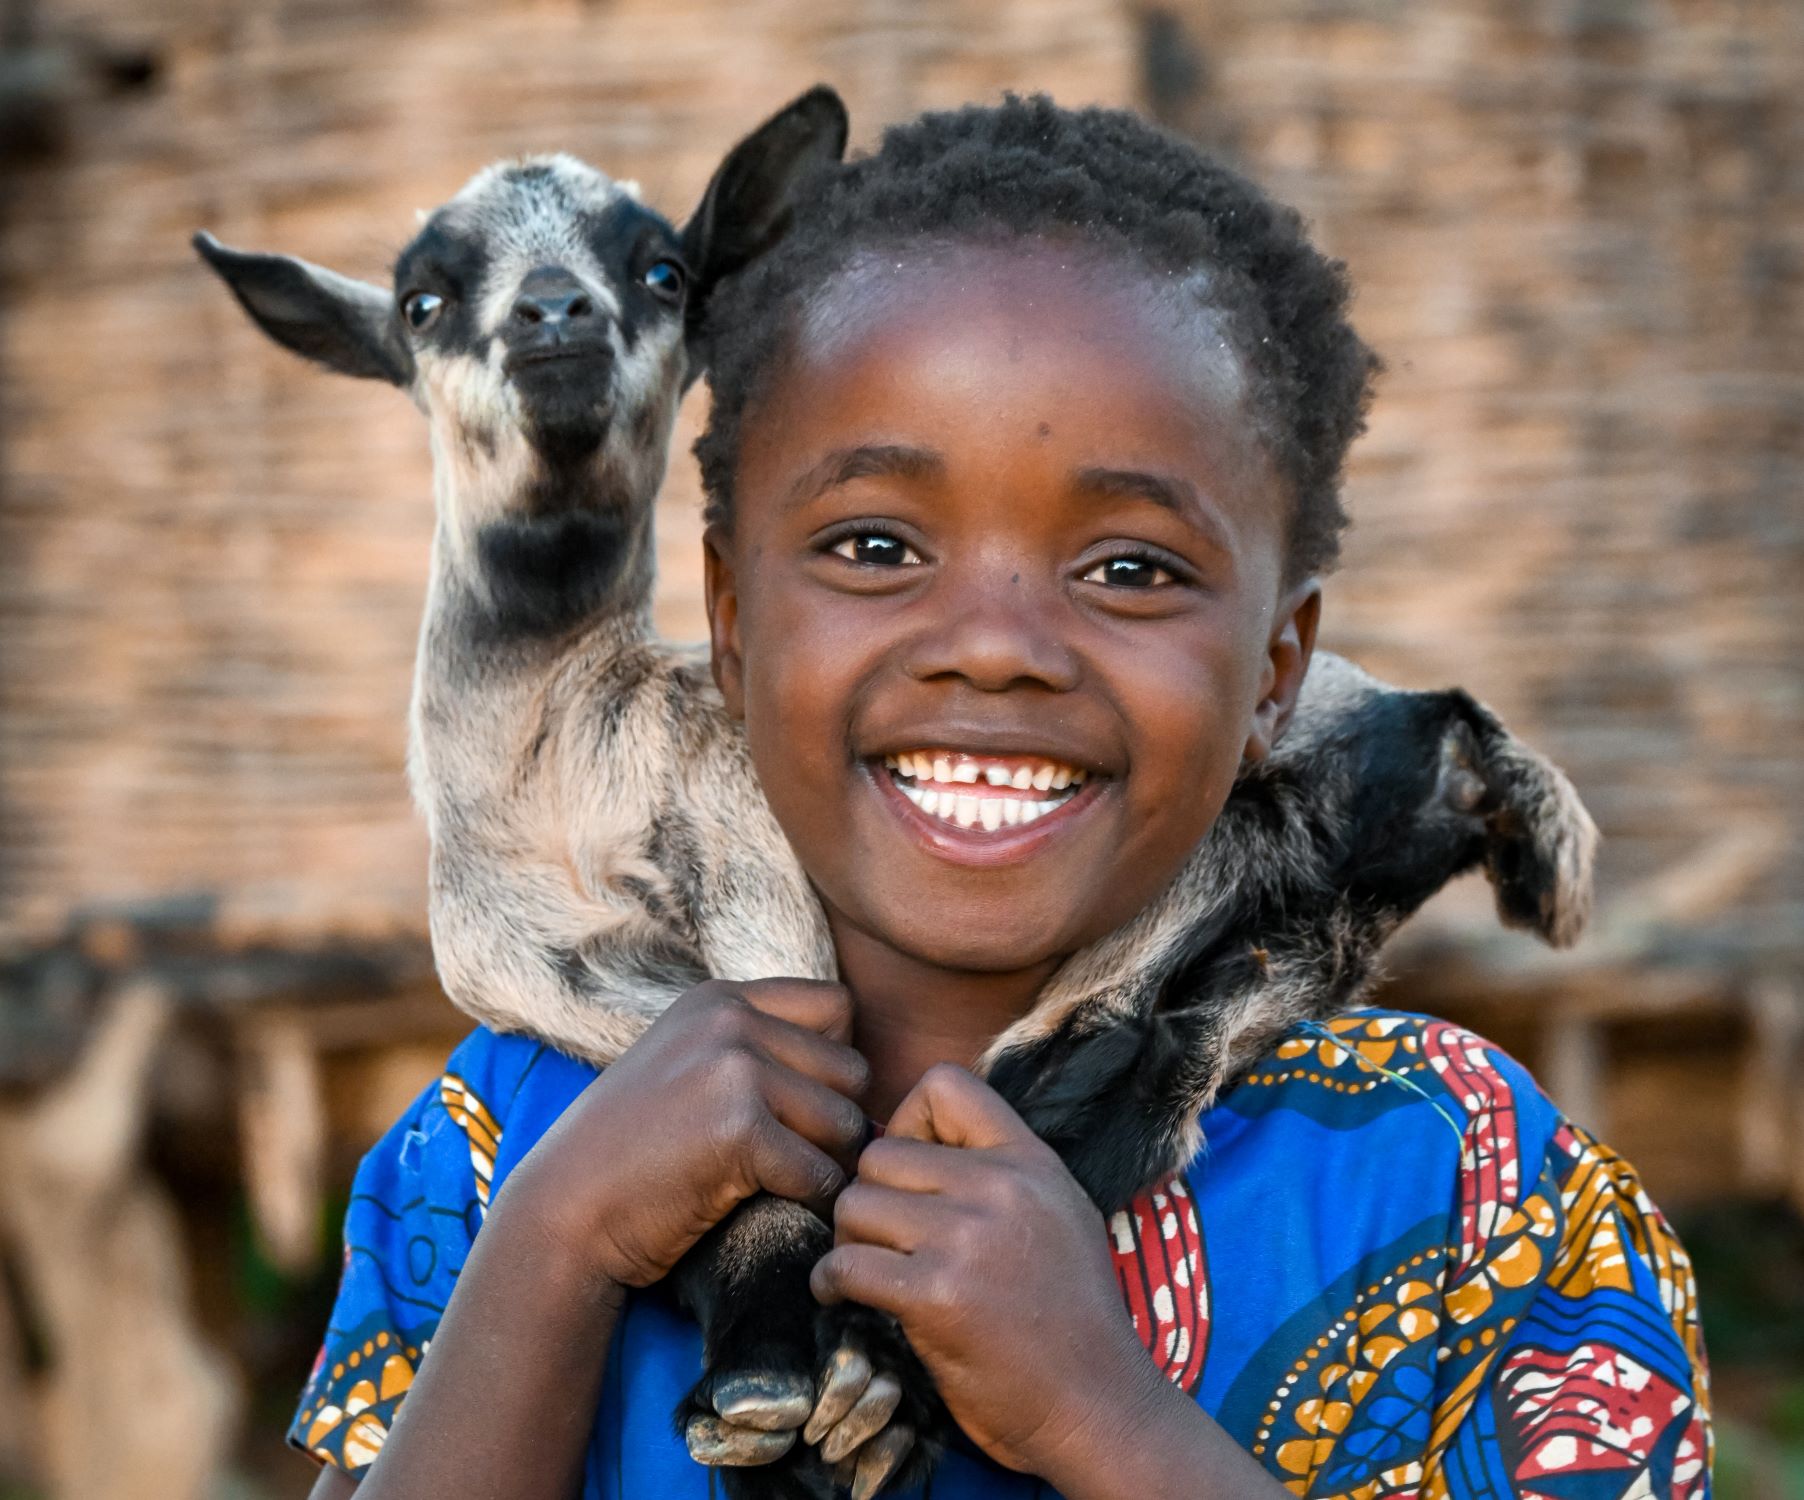 Zambia girl thrilled with gift of goat